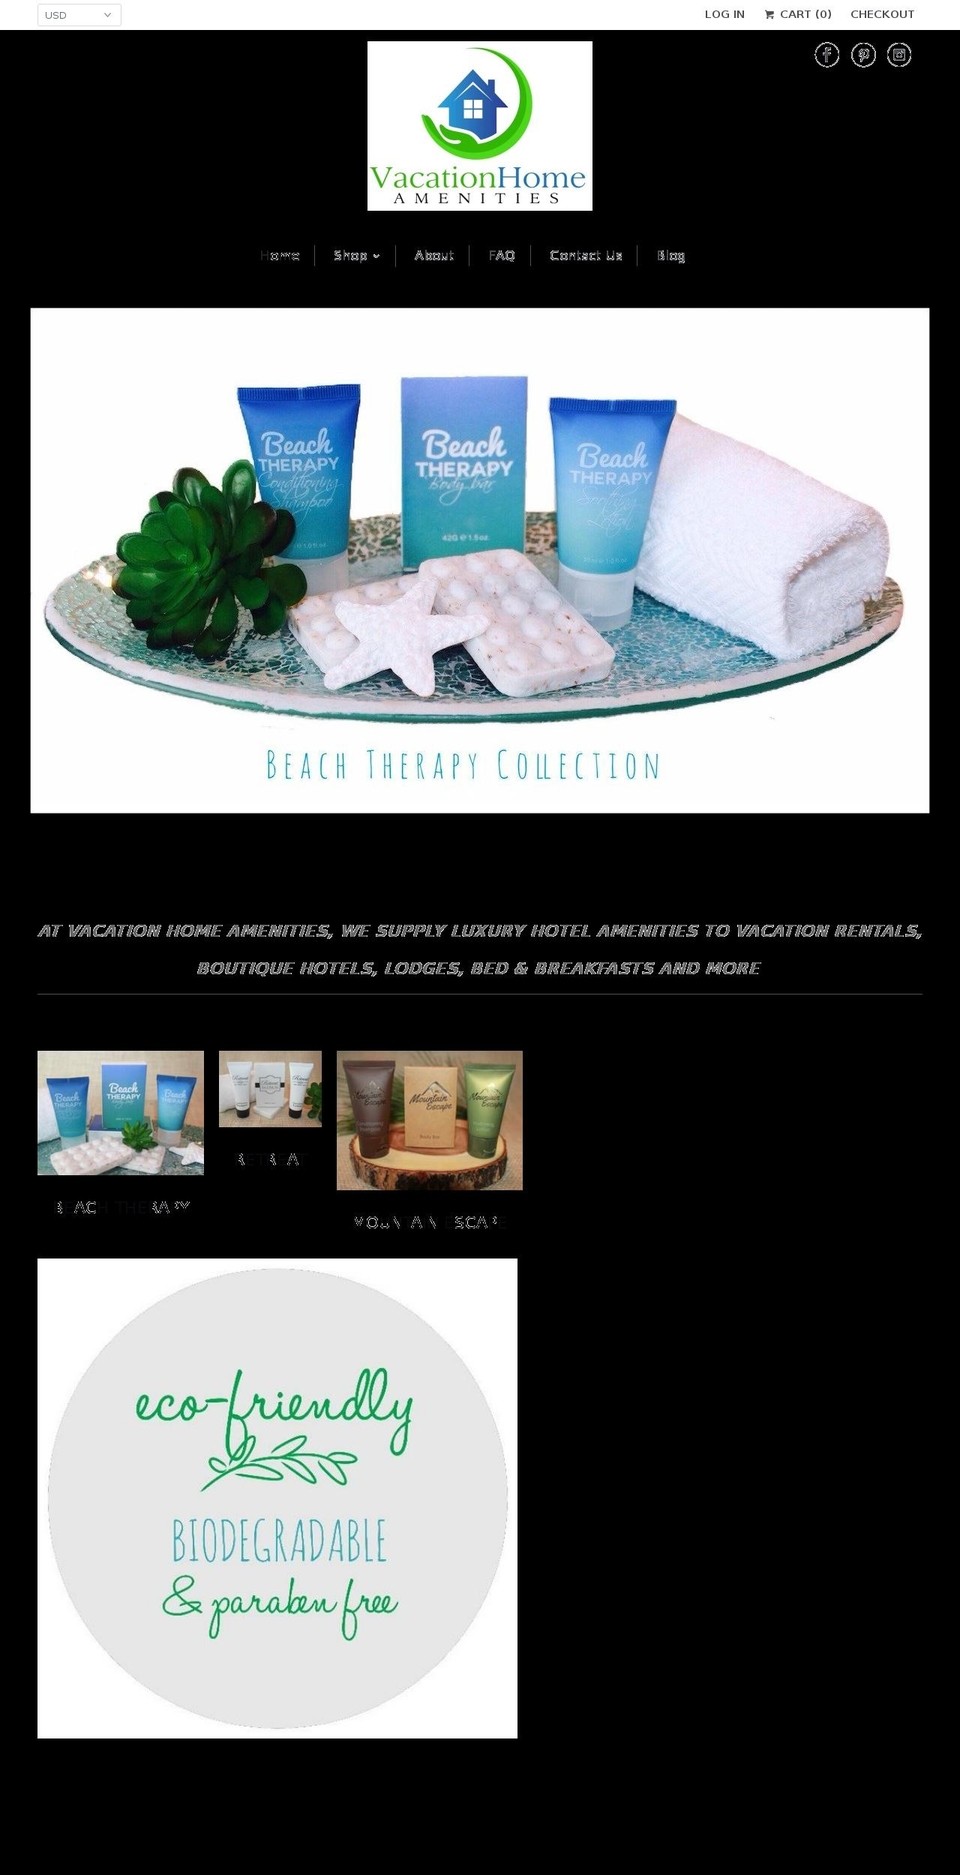 Current Theme Shopify theme site example vacationhomeamenities.com